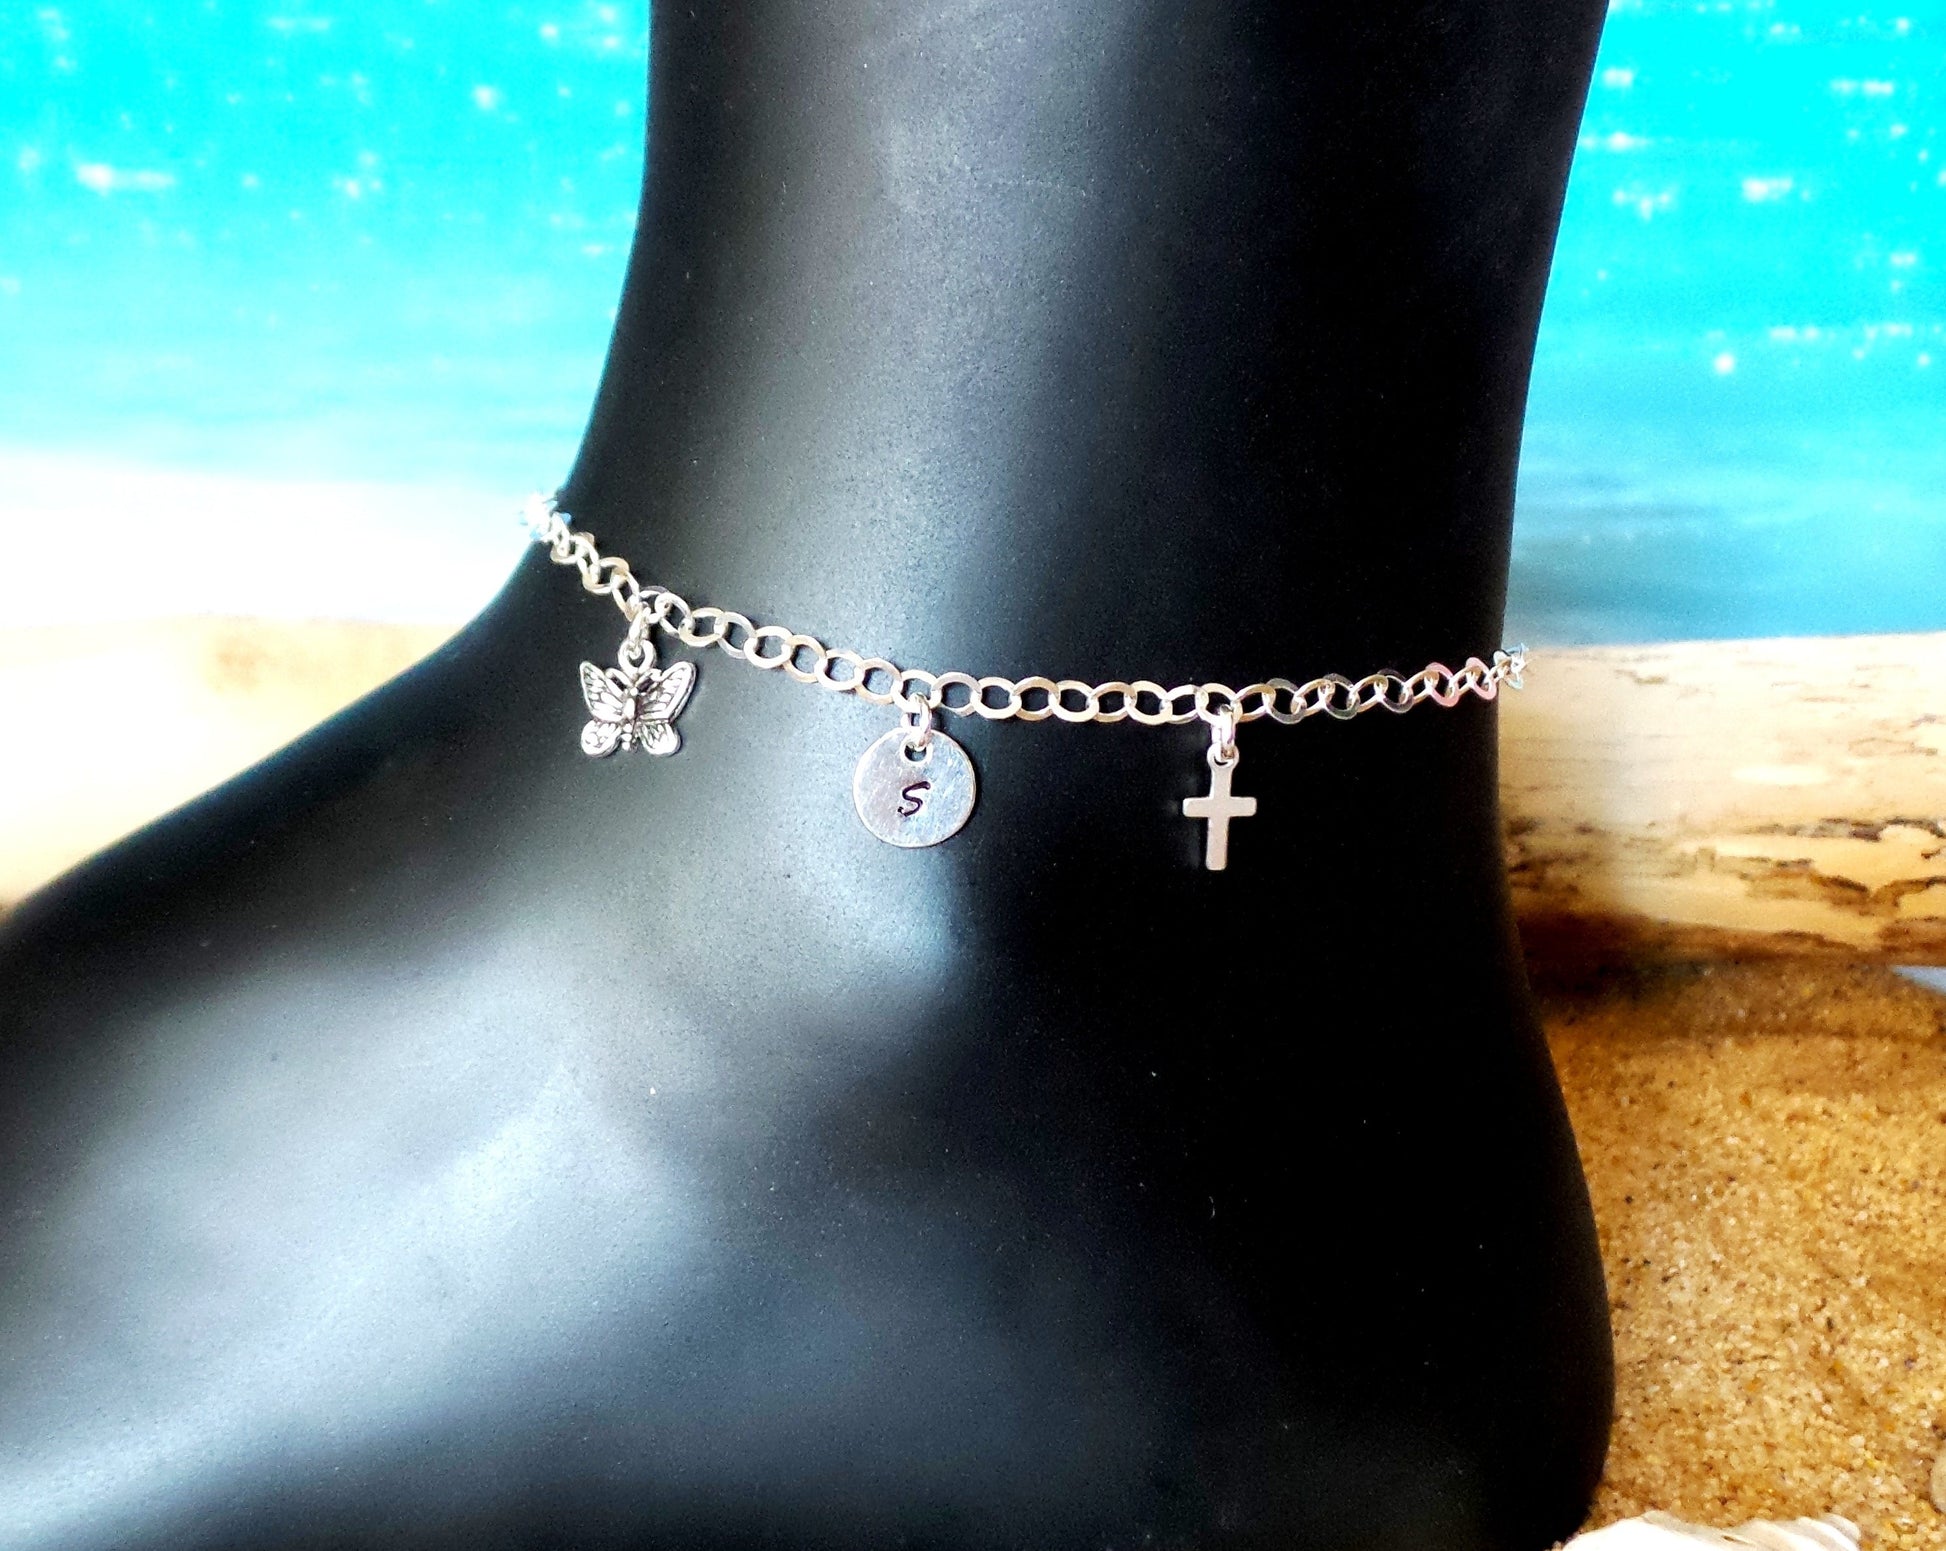 Personalized Butterfly, Cross, Initial Anklet, Ankle Bracelet made with Sterling Silver, Butterfly and Cross Pendants, Hand stamped Initial pendant on Chain. 